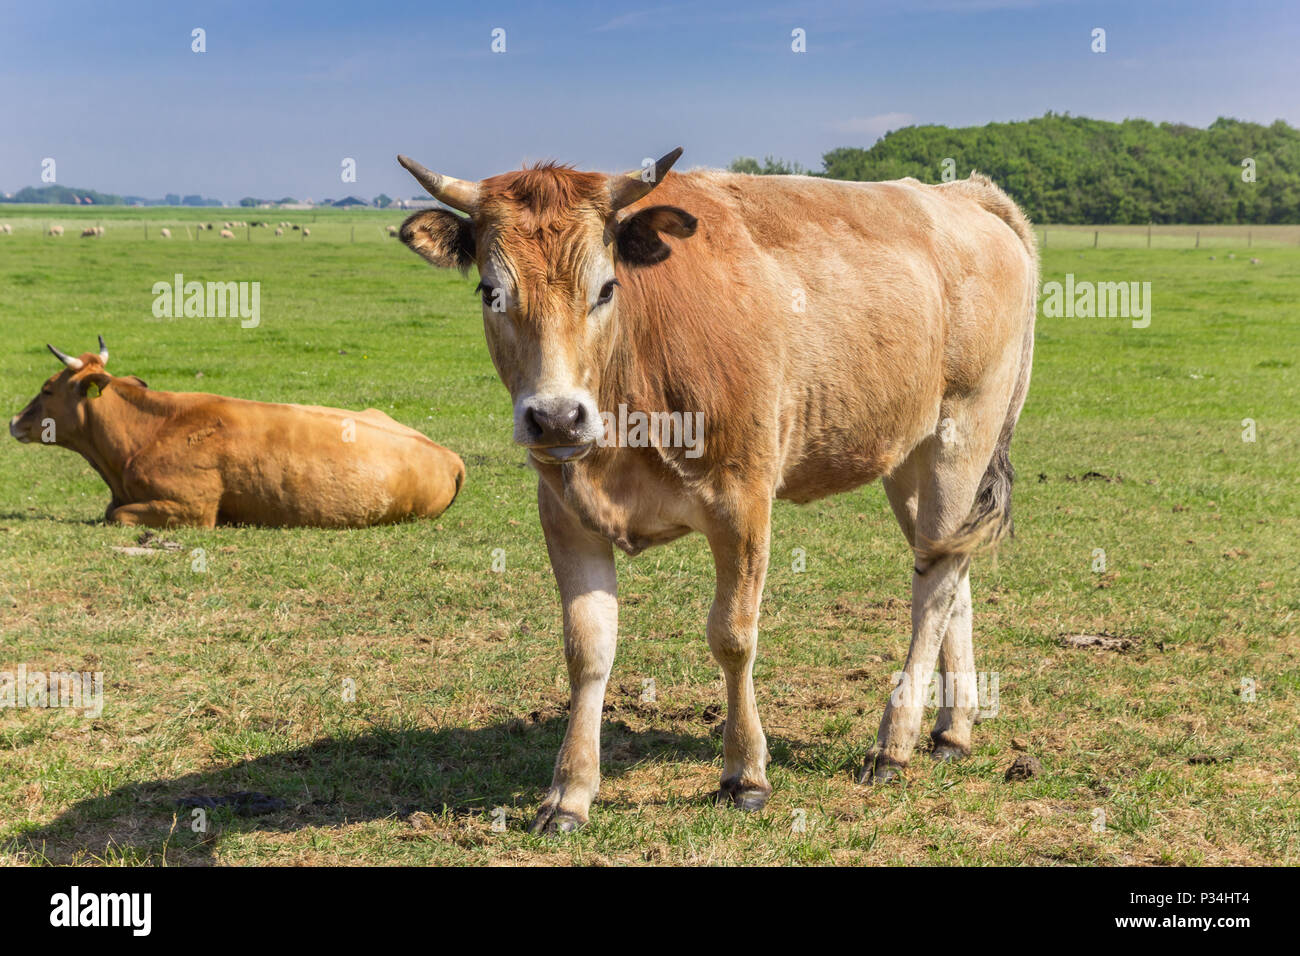 Limousin cow in the landscape of Texel island, Netherlands Stock Photo